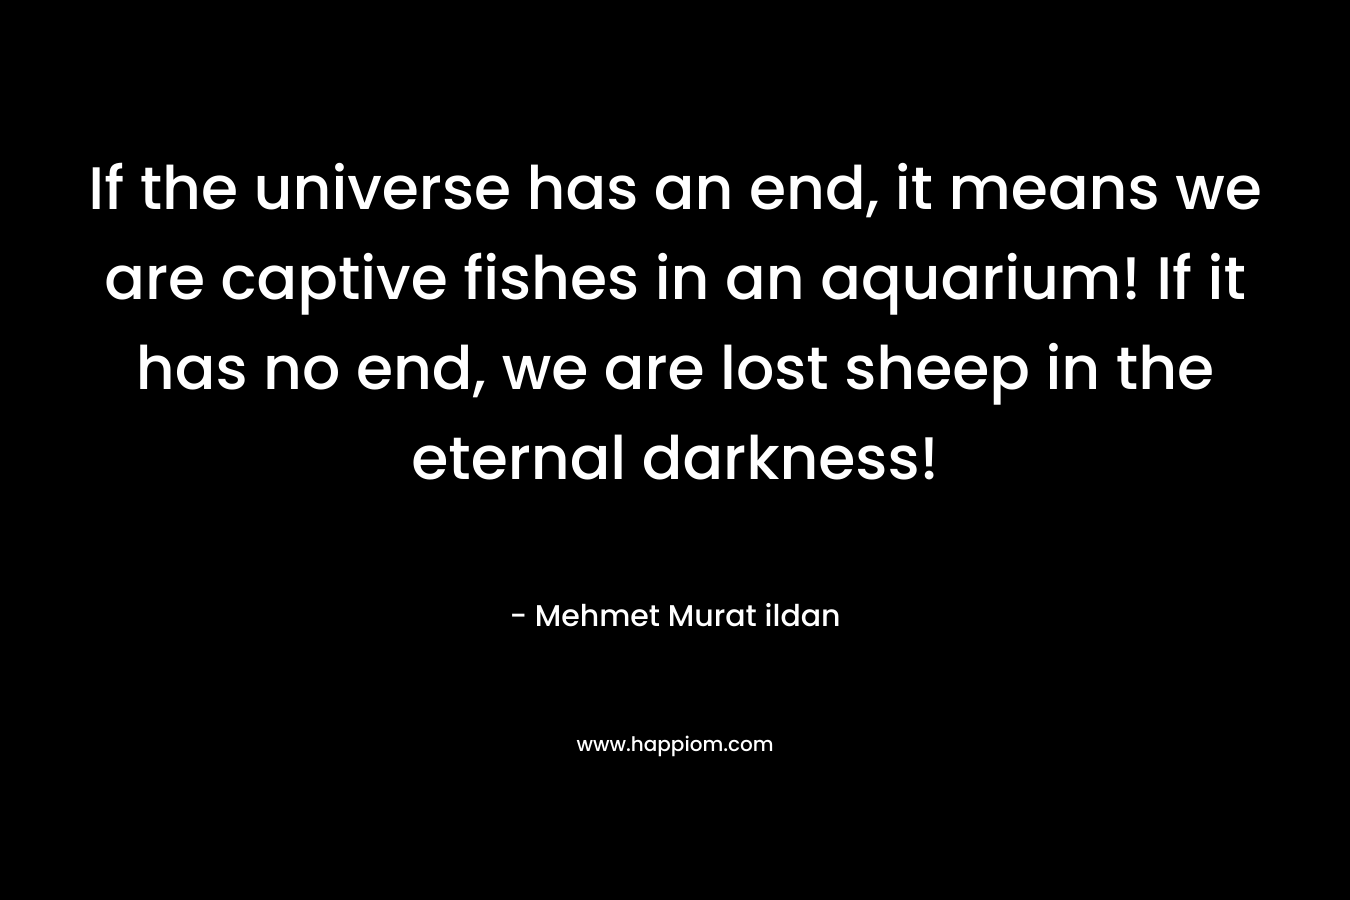 If the universe has an end, it means we are captive fishes in an aquarium! If it has no end, we are lost sheep in the eternal darkness! – Mehmet Murat ildan